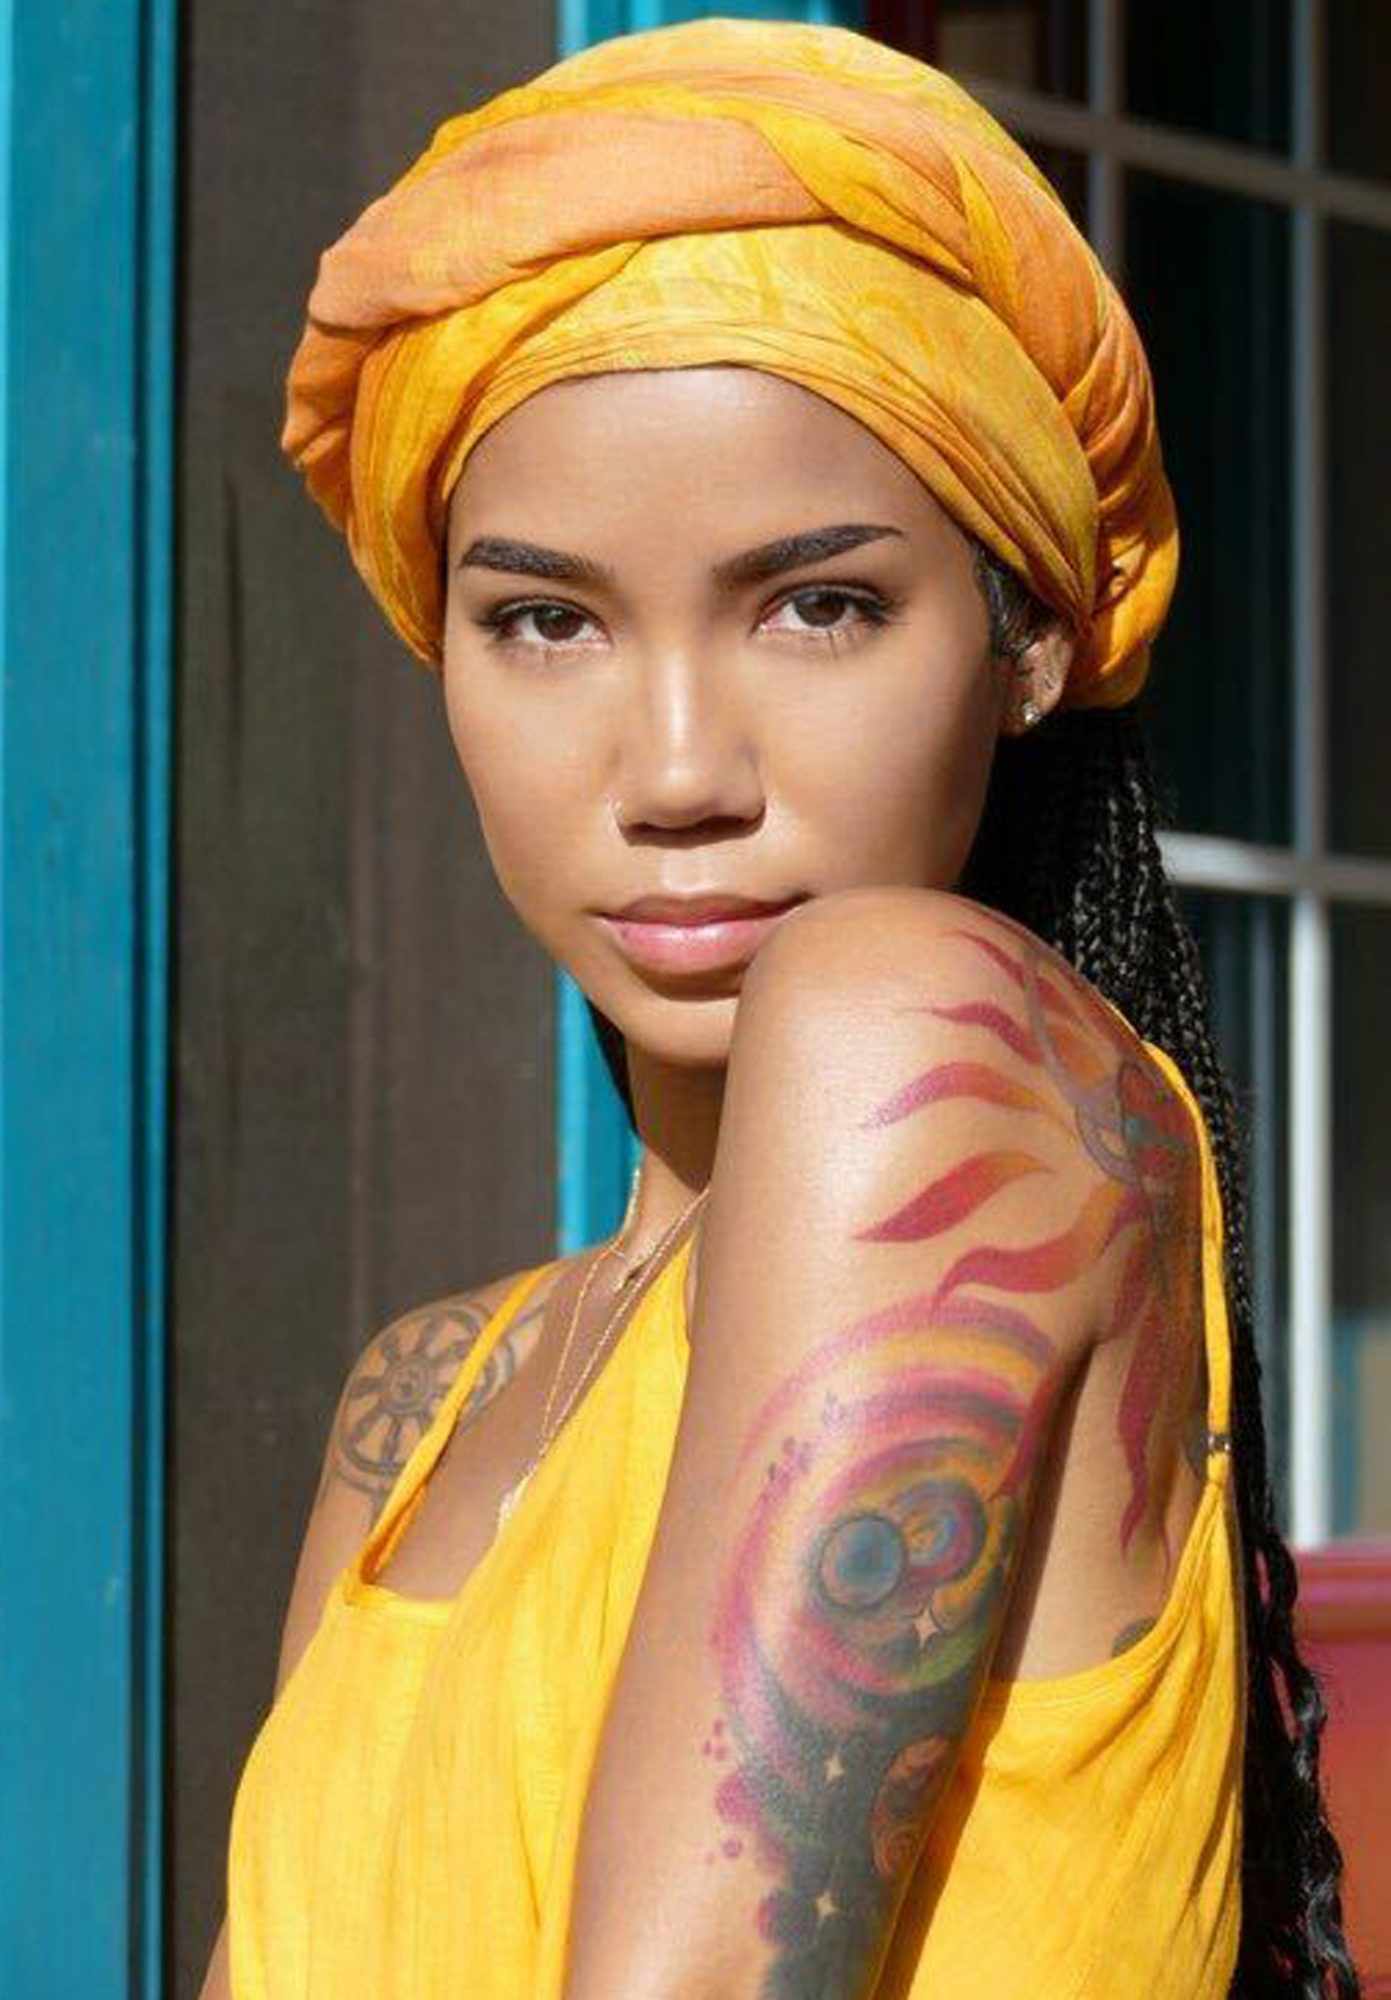 jhene aiko songs to listen to when